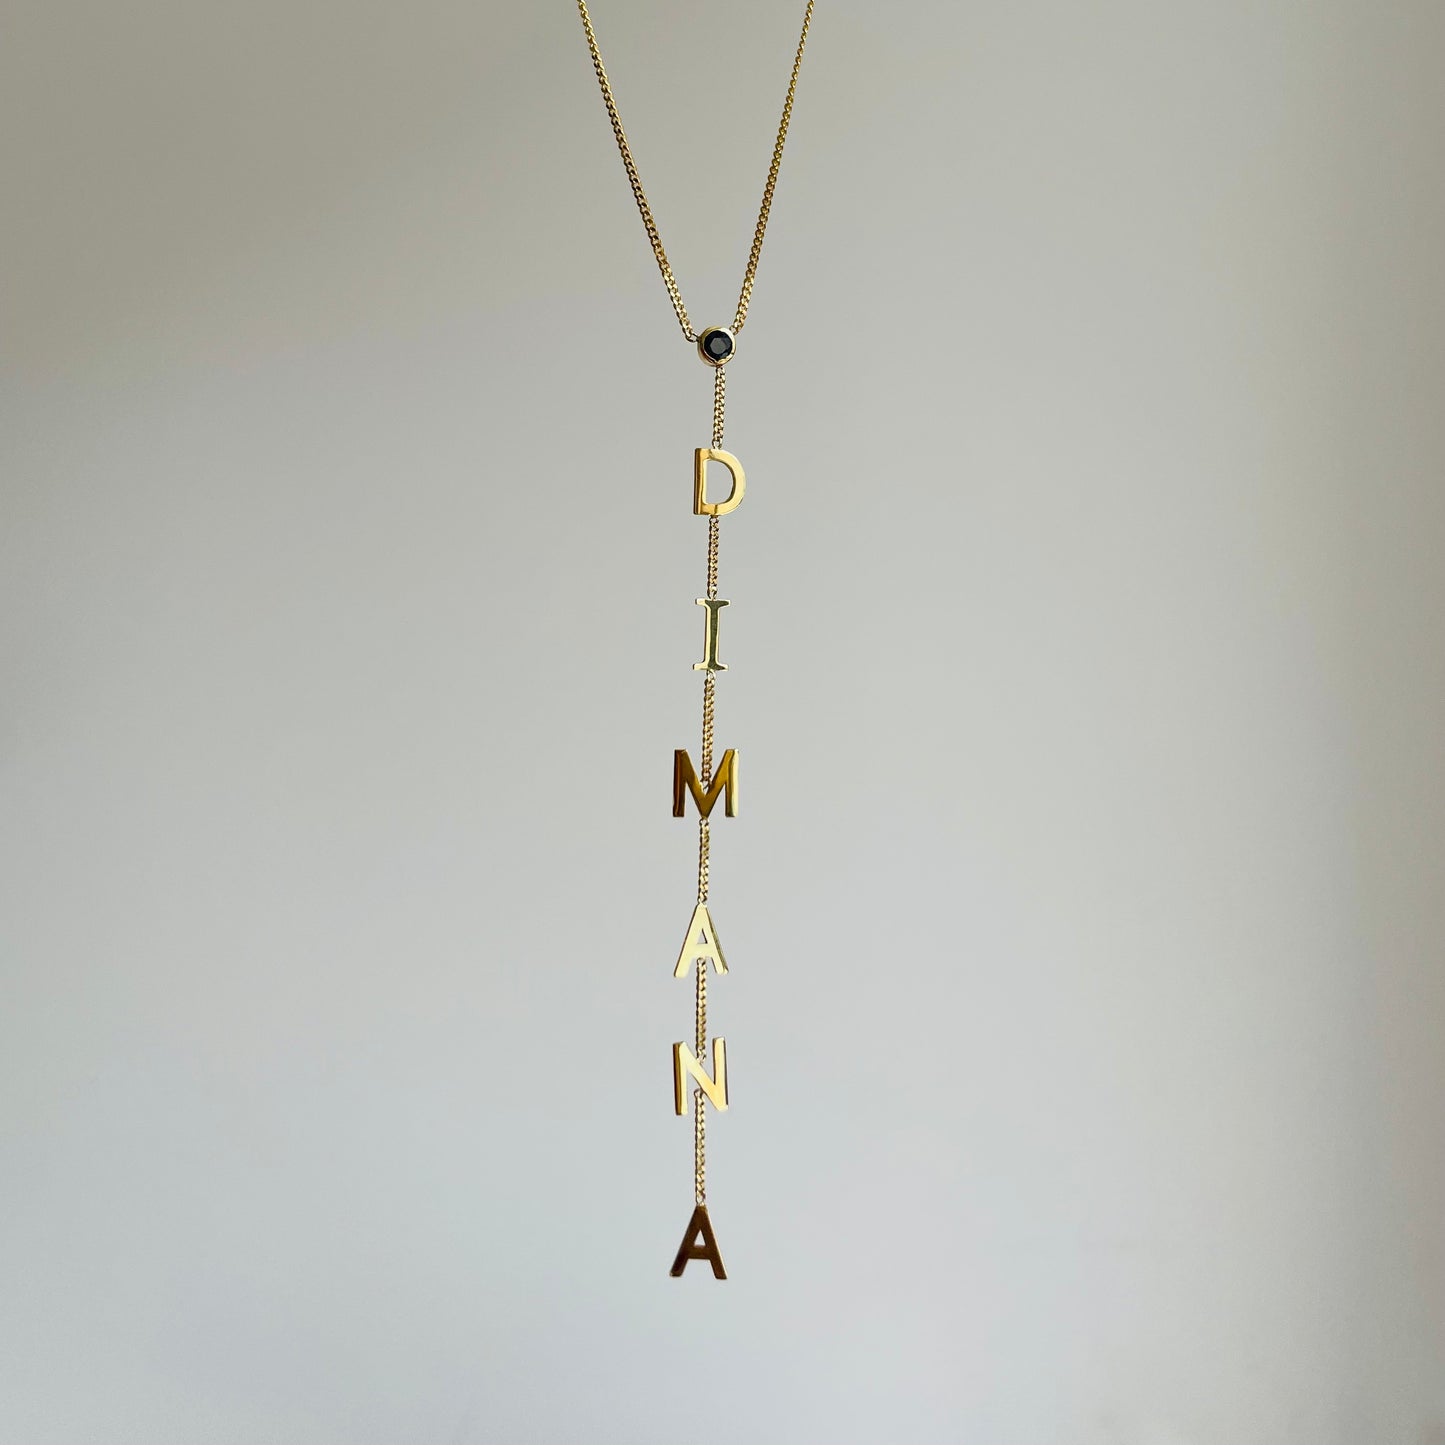 NAME ON CHAIN necklace